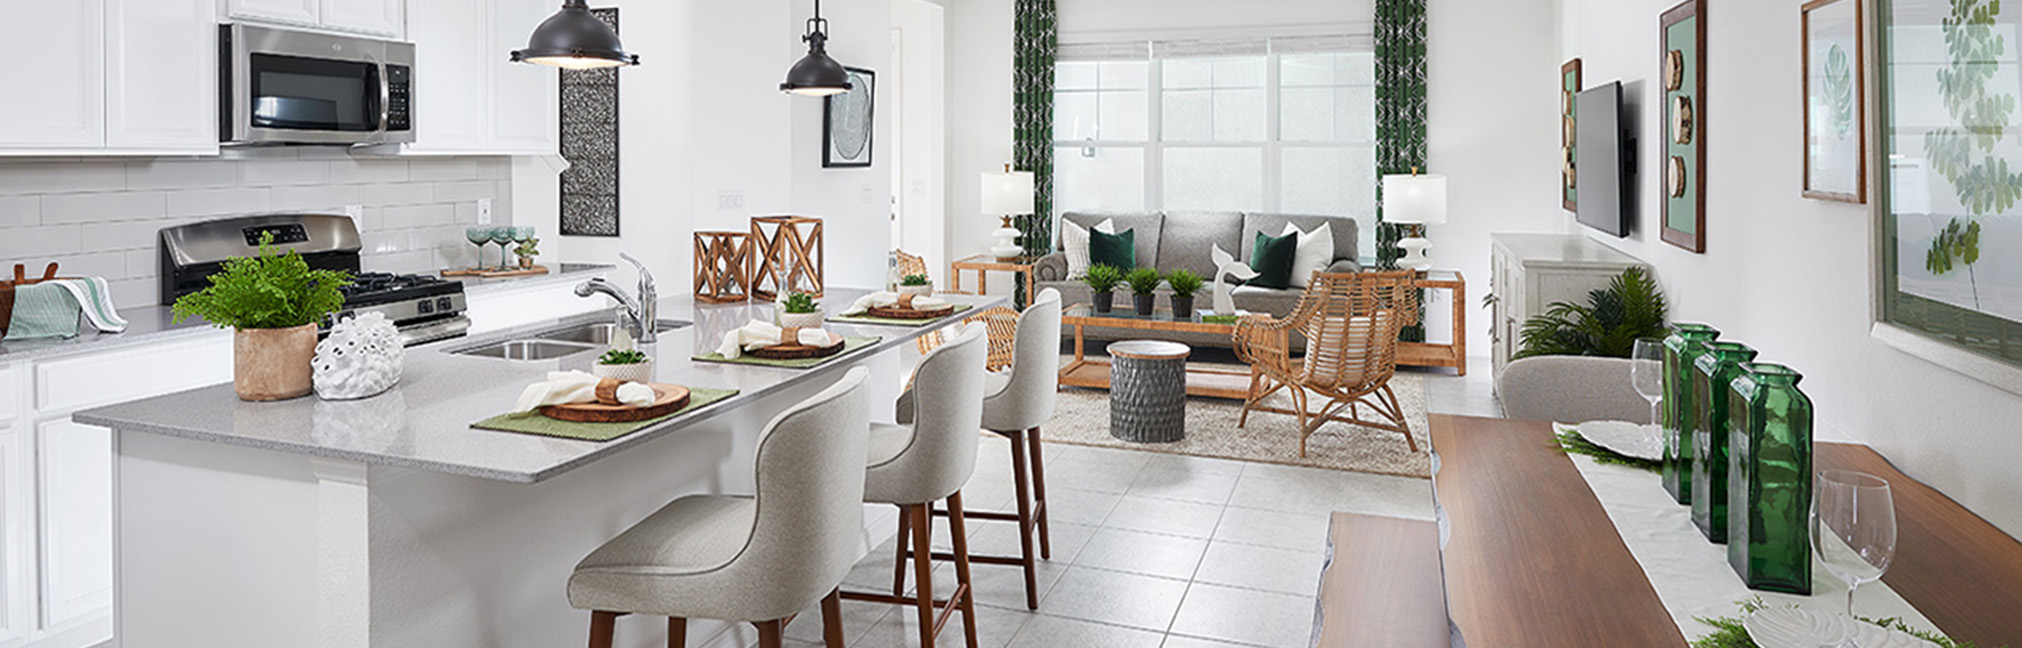 Interior image of kitchen dining and living rooms in Townhome by Park Square Homes